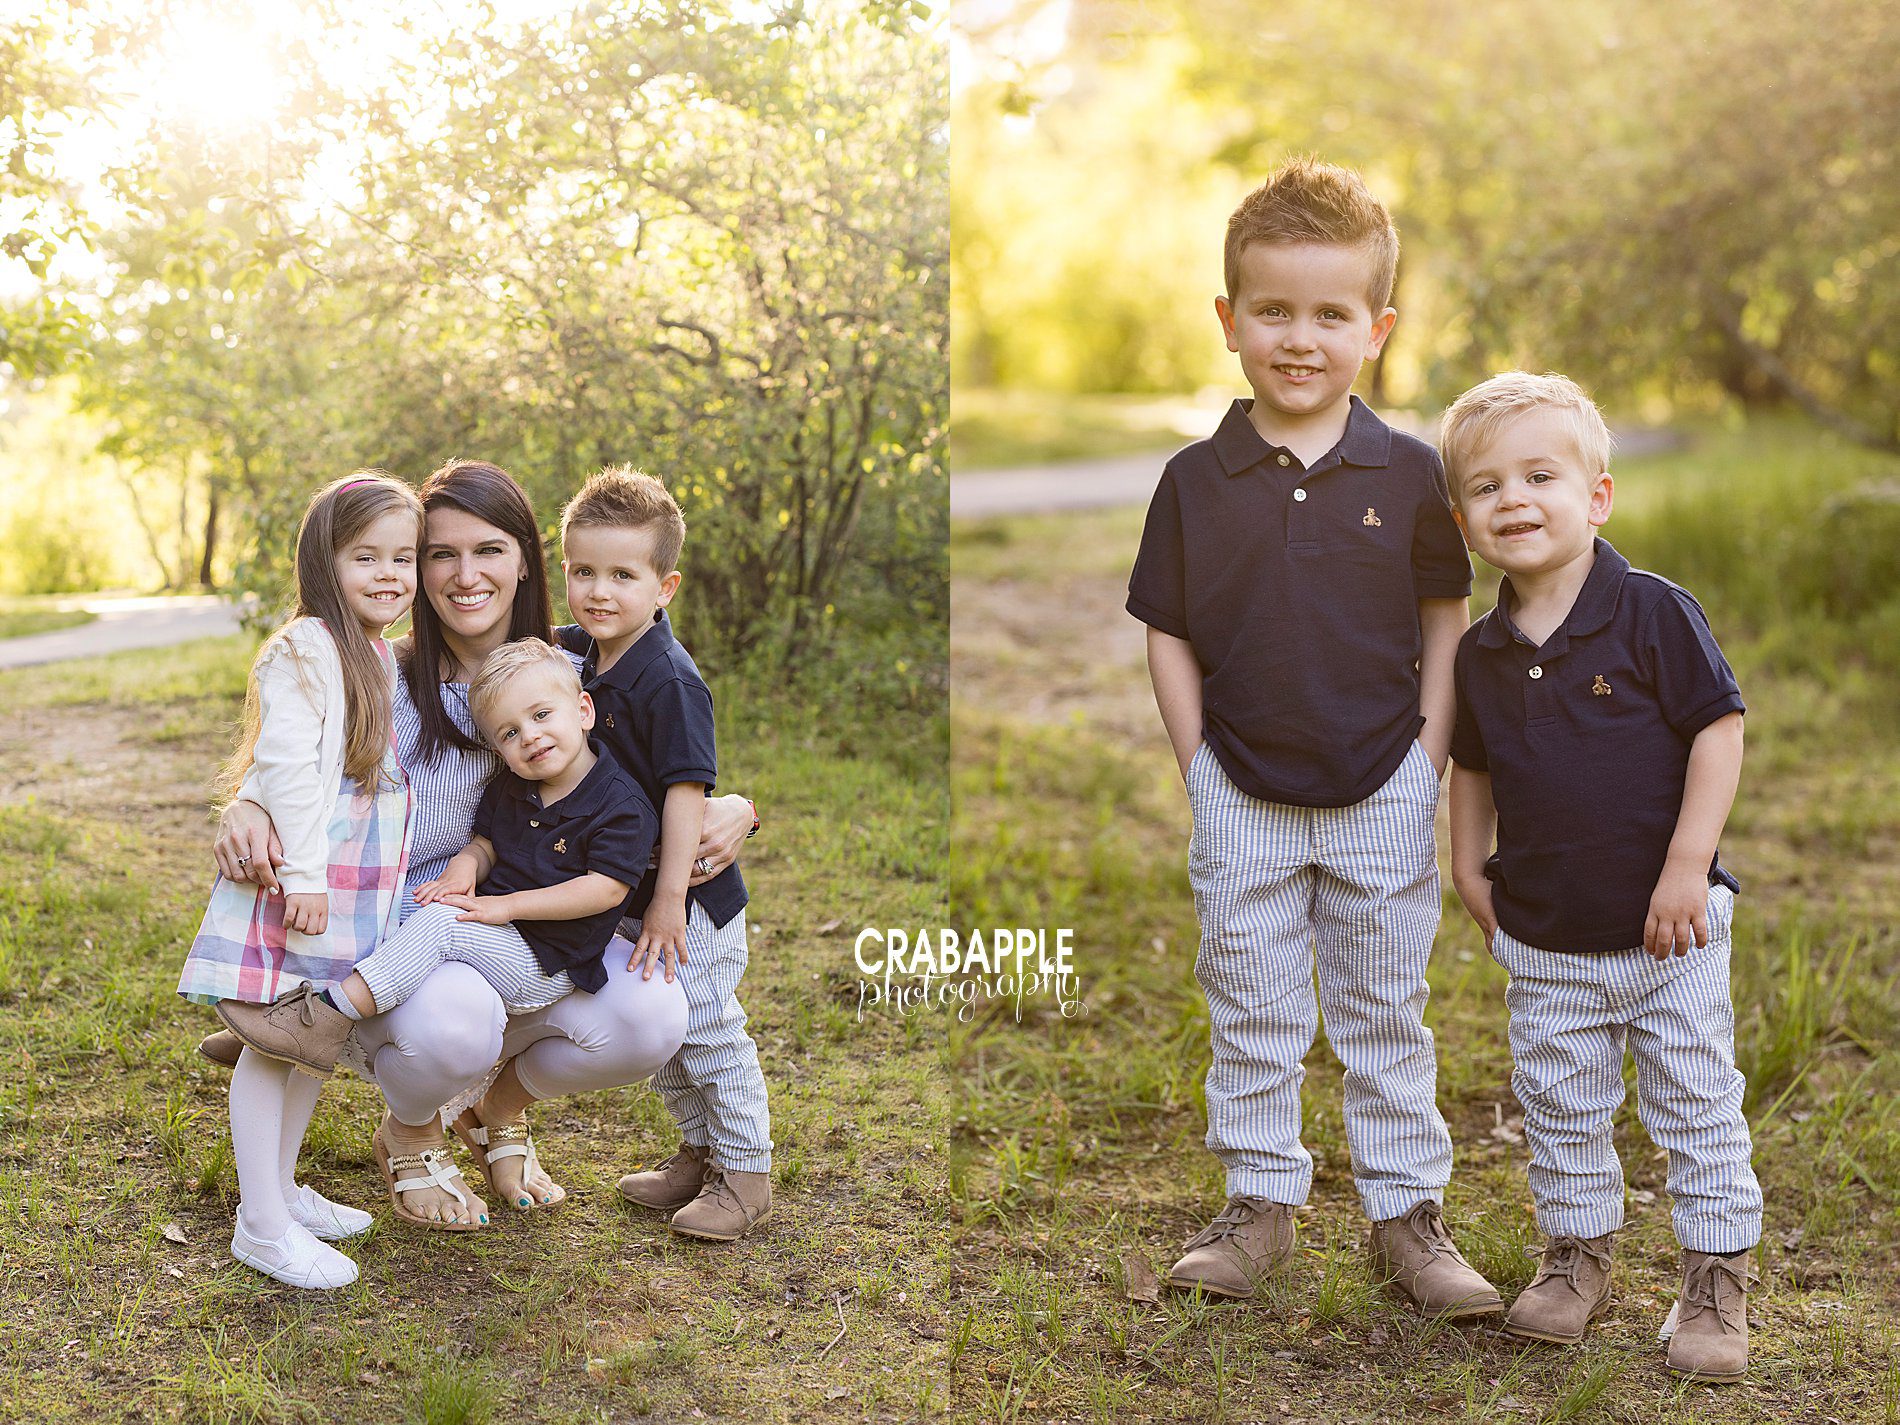 Family and child portraits outdoors in spring